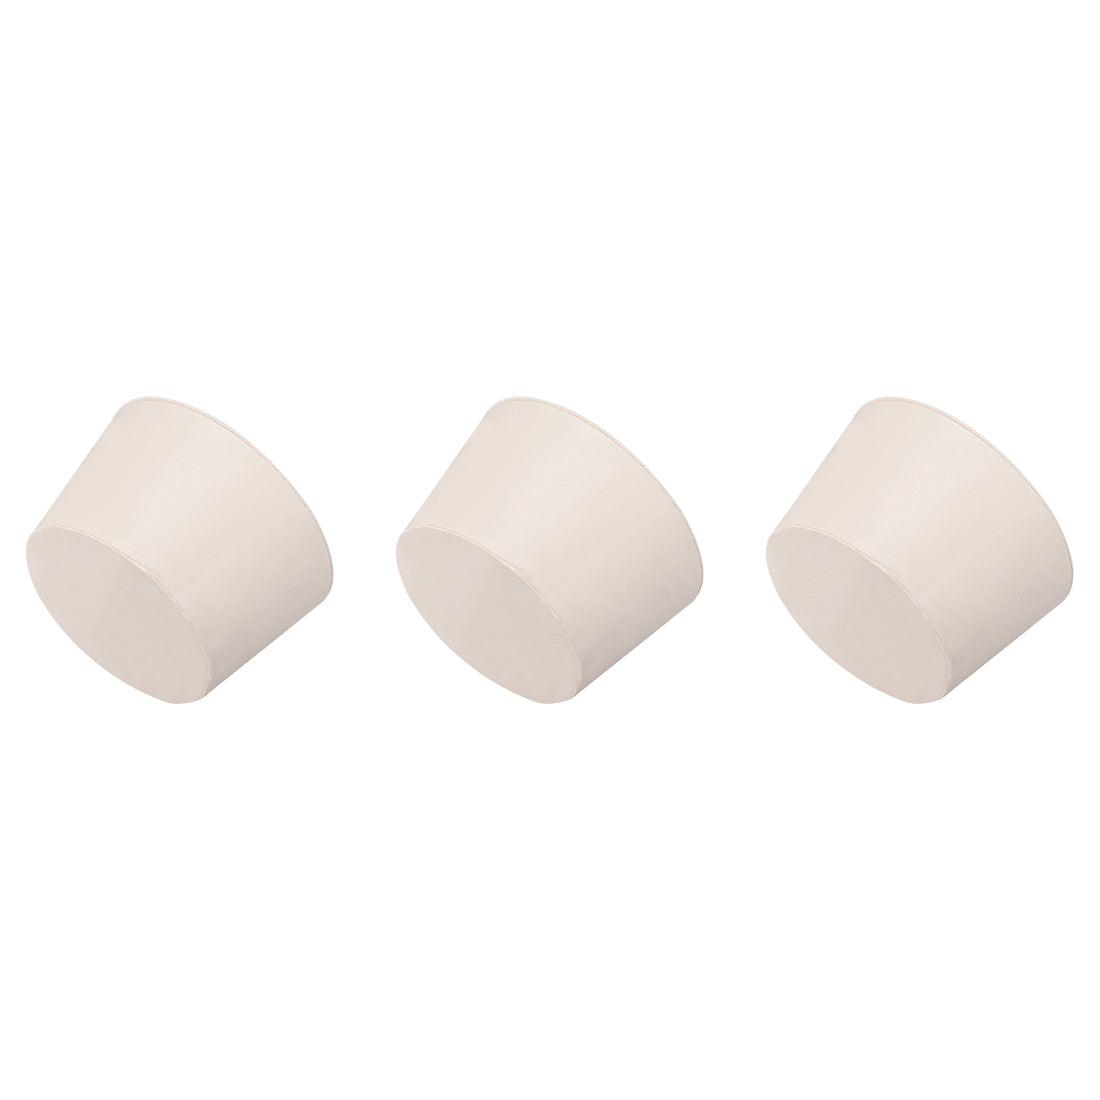 Uxcell Uxcell White Tapered Shaped Solid Rubber Stopper for Lab Tube Stopper Size 9 3pcs